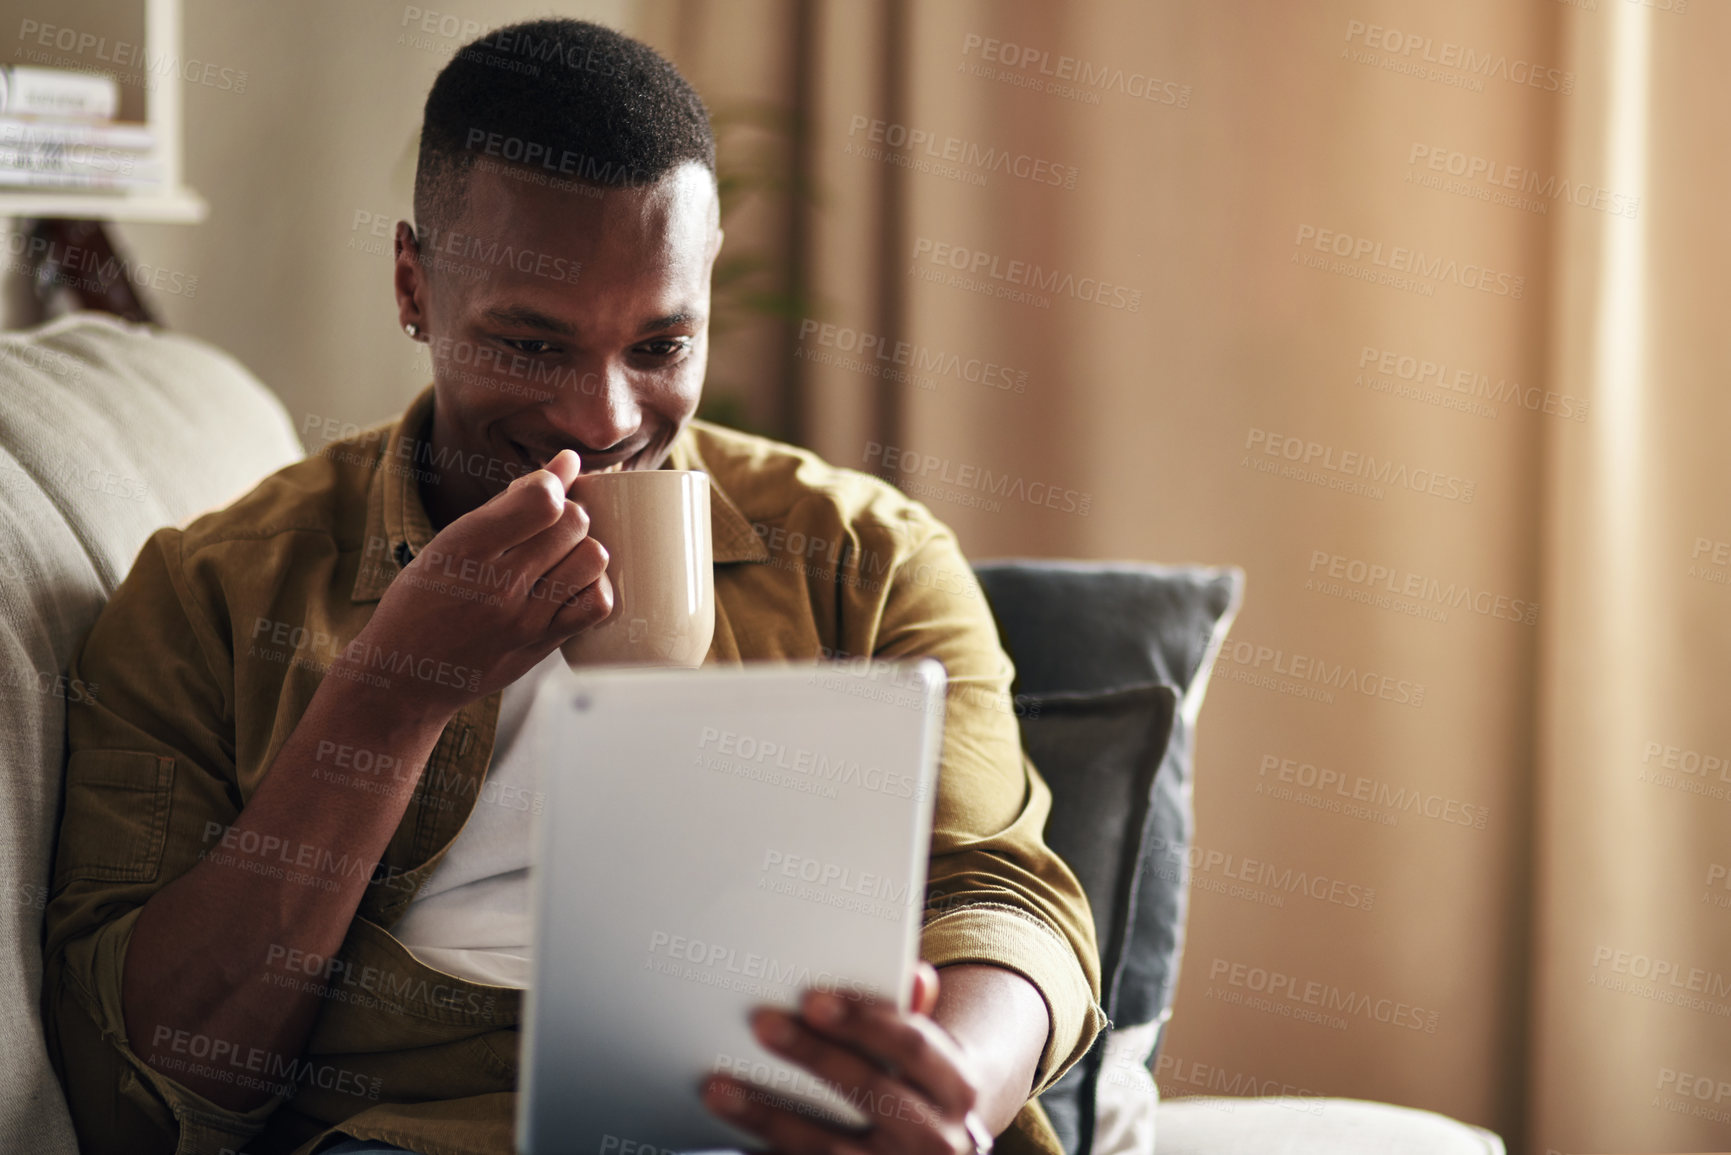 Buy stock photo Cropped shot of a handsome young man drinking coffee while using a digital tablet in his living room at home